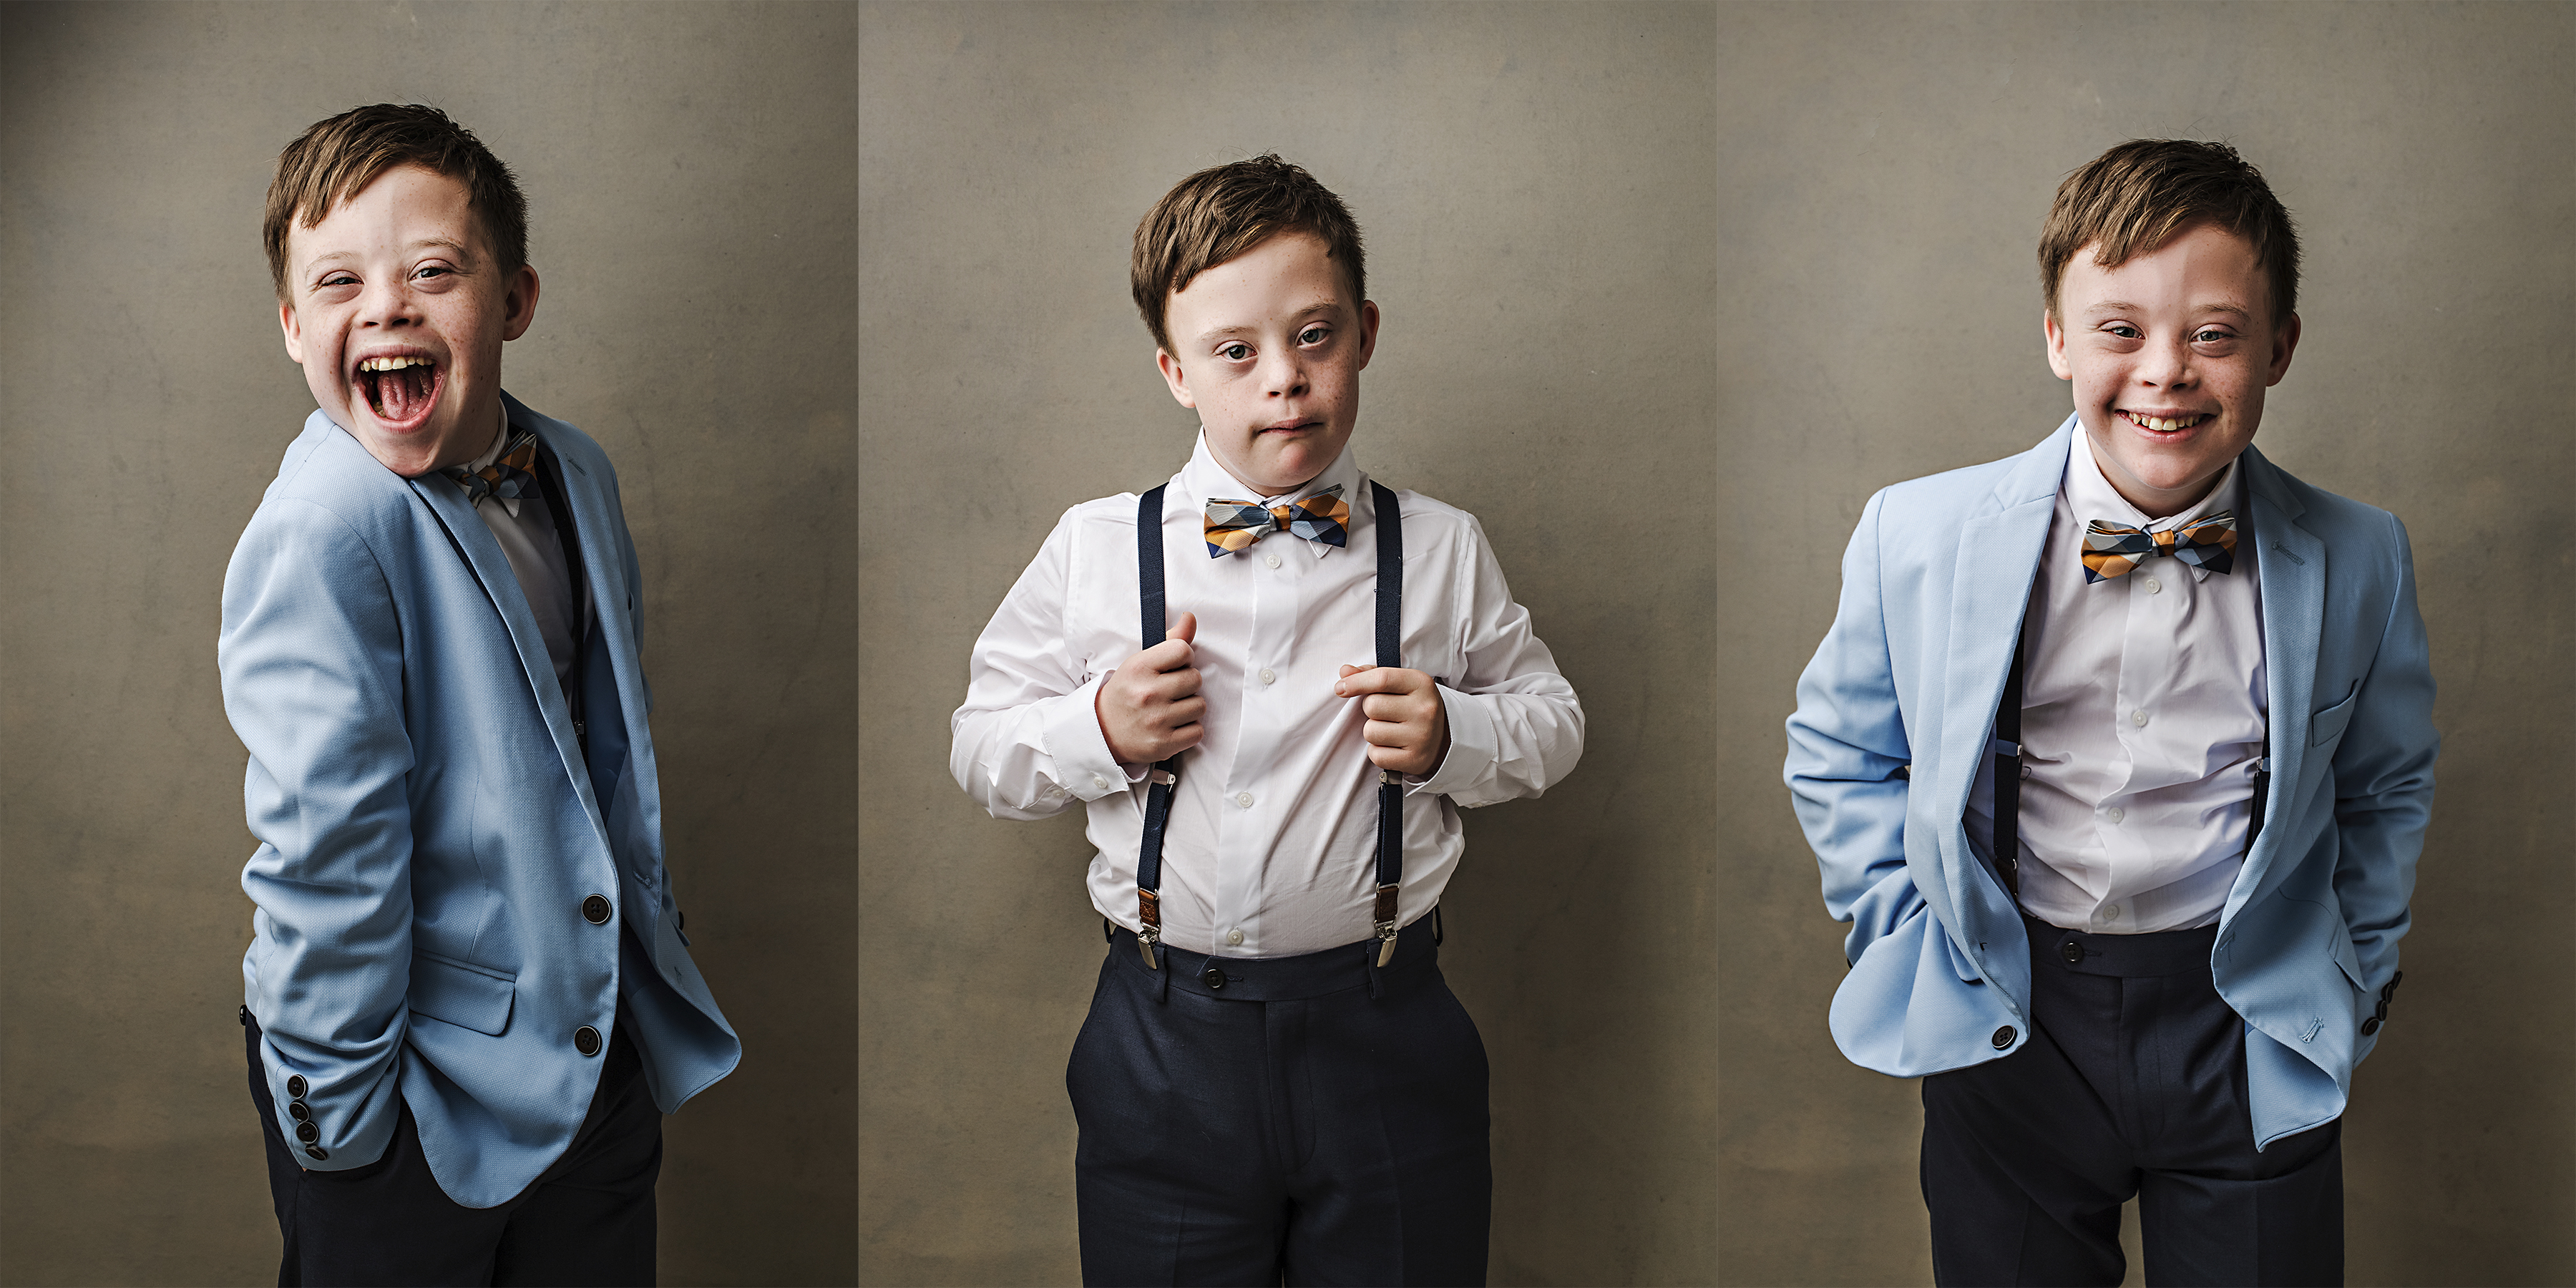 Simon, a boy with Down syndrome wearing a tuxedo and bow tie.